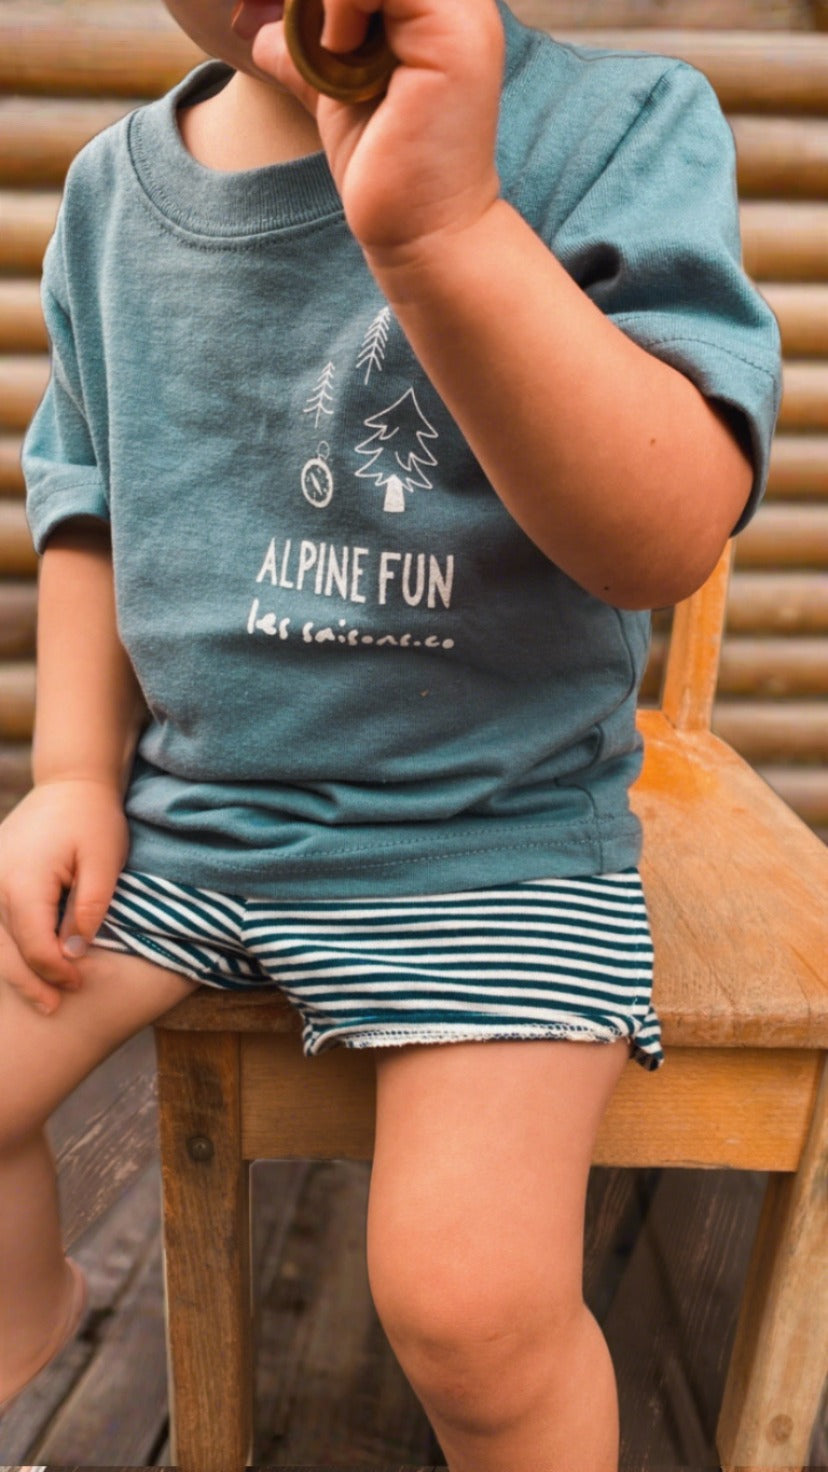 Kids' T-Shirt | Alpine Fun | 2 to 6 Years Old | Printed in Montreal